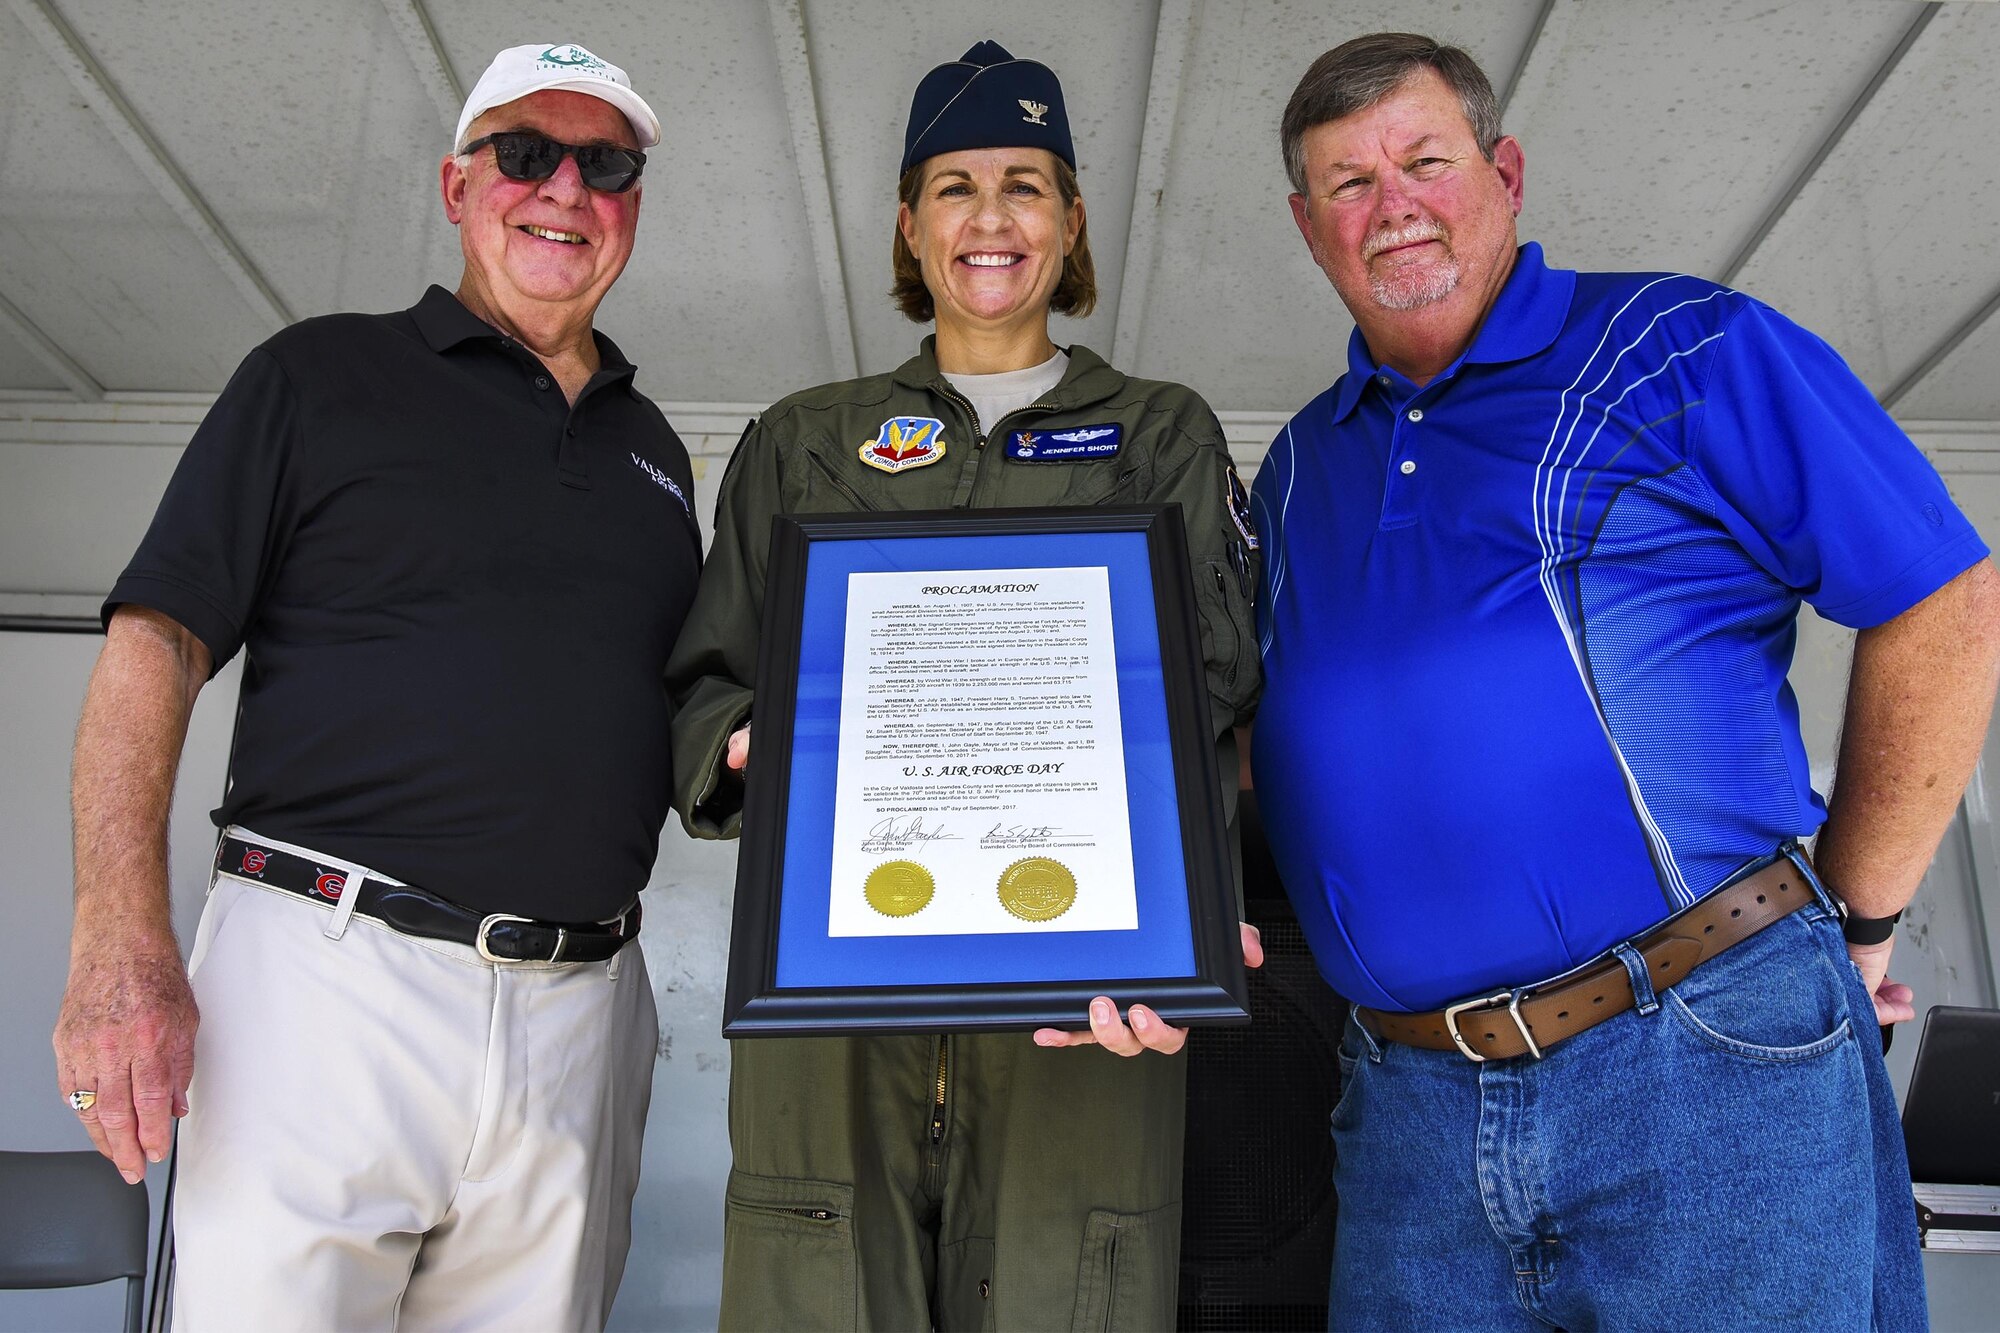 John Gayle, Mayor of Valdosta, left, U.S. Air Force Col. Jennifer Short, 23d Wing commander, middle, and Bill Slaughter, Chairman of the Lowndes County Board of Commissioners, right, display a proclamation during a U.S. Air Force 70th birthday celebration, Sept. 16, 2017, in Valdosta, Ga. During the celebration, Gayle and Slaughter both proclaimed that Sept. 16 will be named, “U.S. Air Force Day” within Lowndes County and Valdosta. (U.S. Air Force photo by Airman Eugene Oliver)